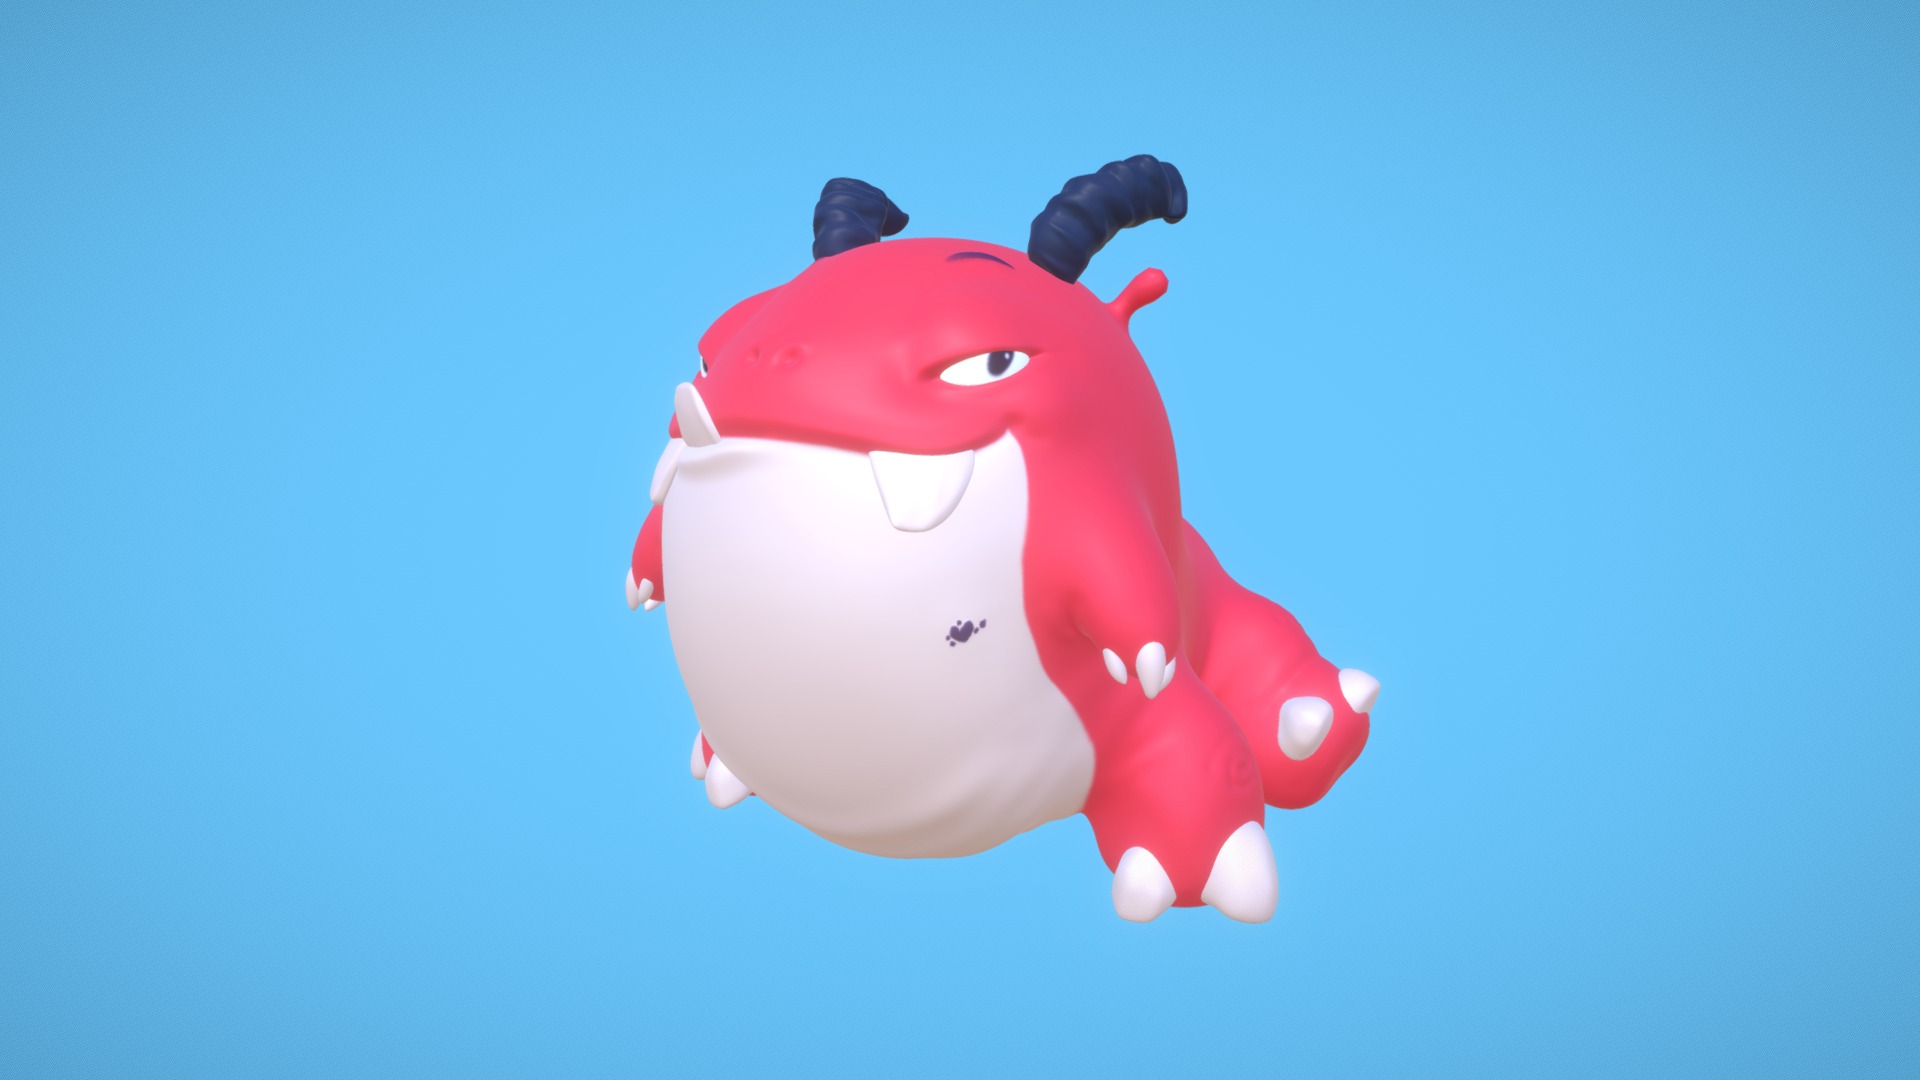 3D model Molakun - This is a 3D model of the Molakun. The 3D model is about a red and white toy.